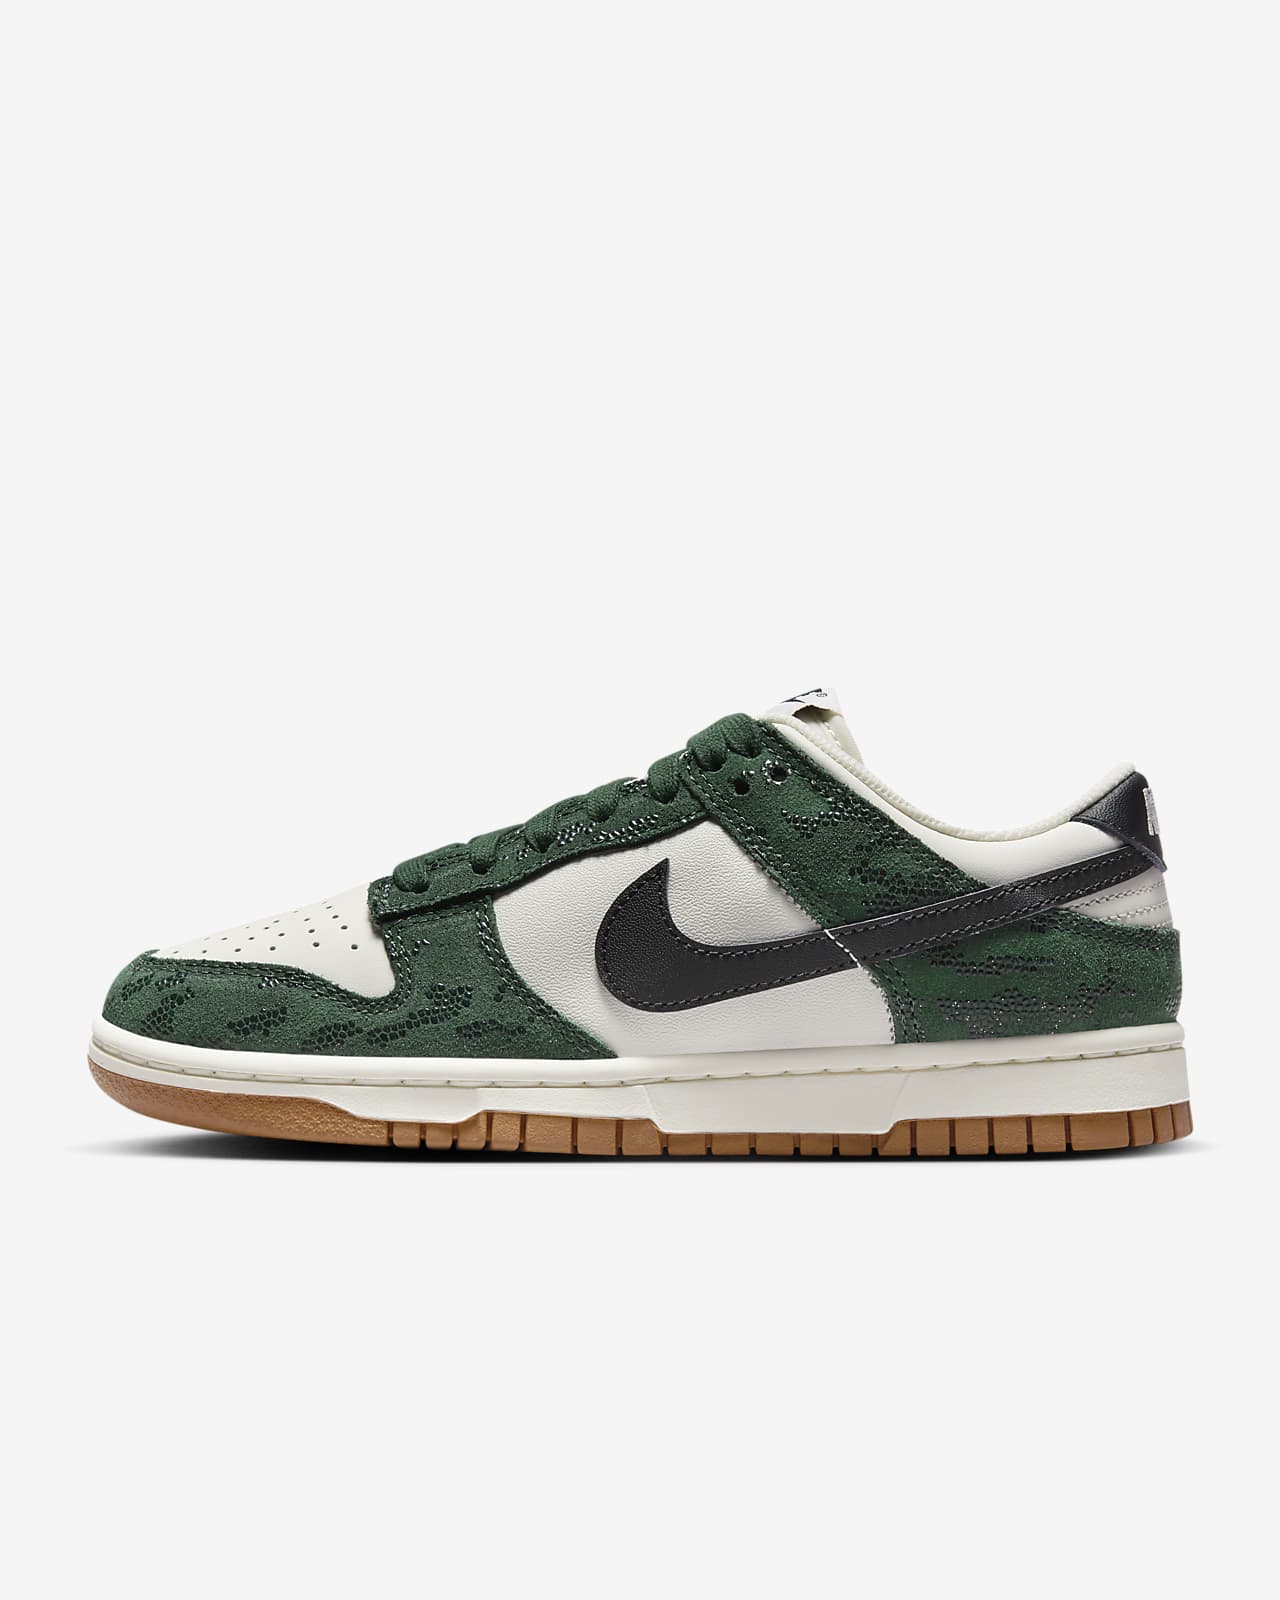 Nike Dunk Low Spartan Green (Varsity Green): Review & On-Feet 